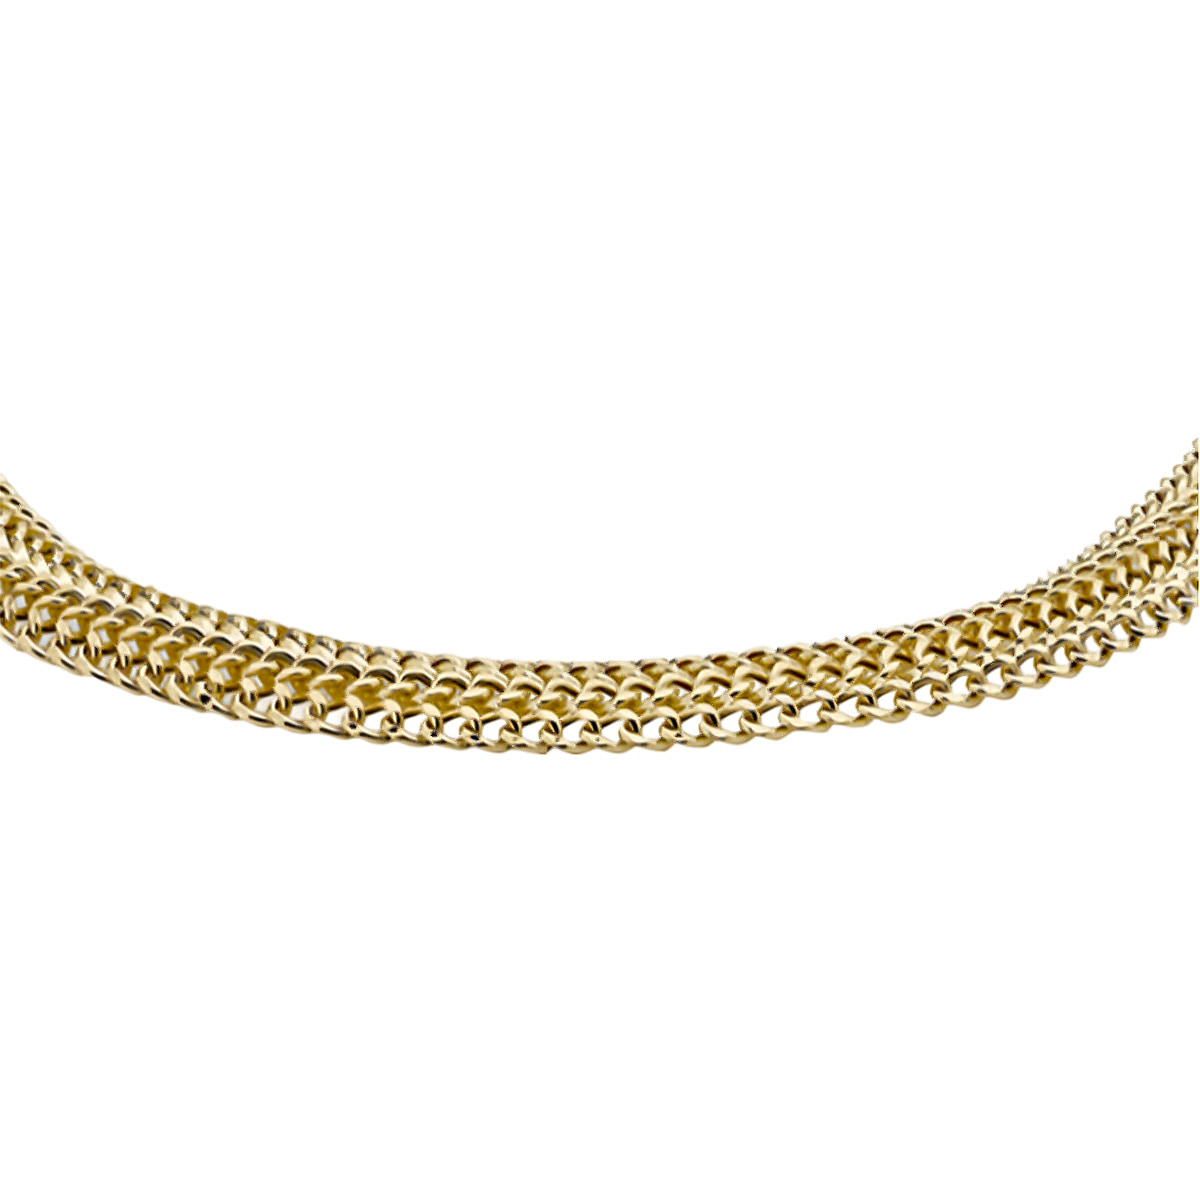 Vicenza Closeout - 9K Yellow Gold Diamond Cut Domed Curb Bismark Necklace (Size - 18), Gold Wt. 6.7 Gms